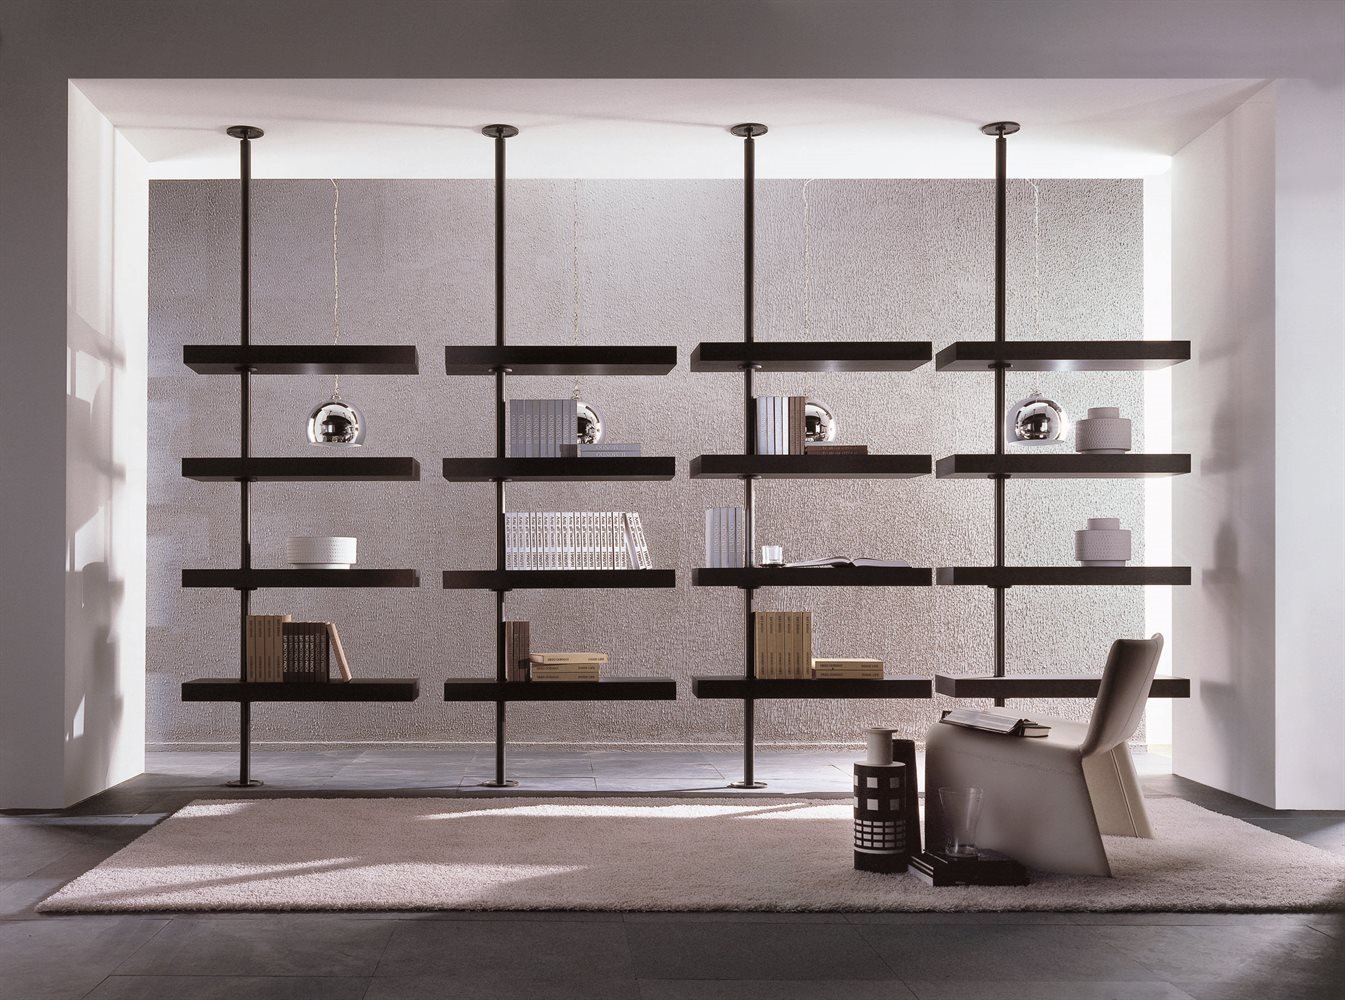 Domino Expo Wall System storage from Porada, designed by T. Colzani